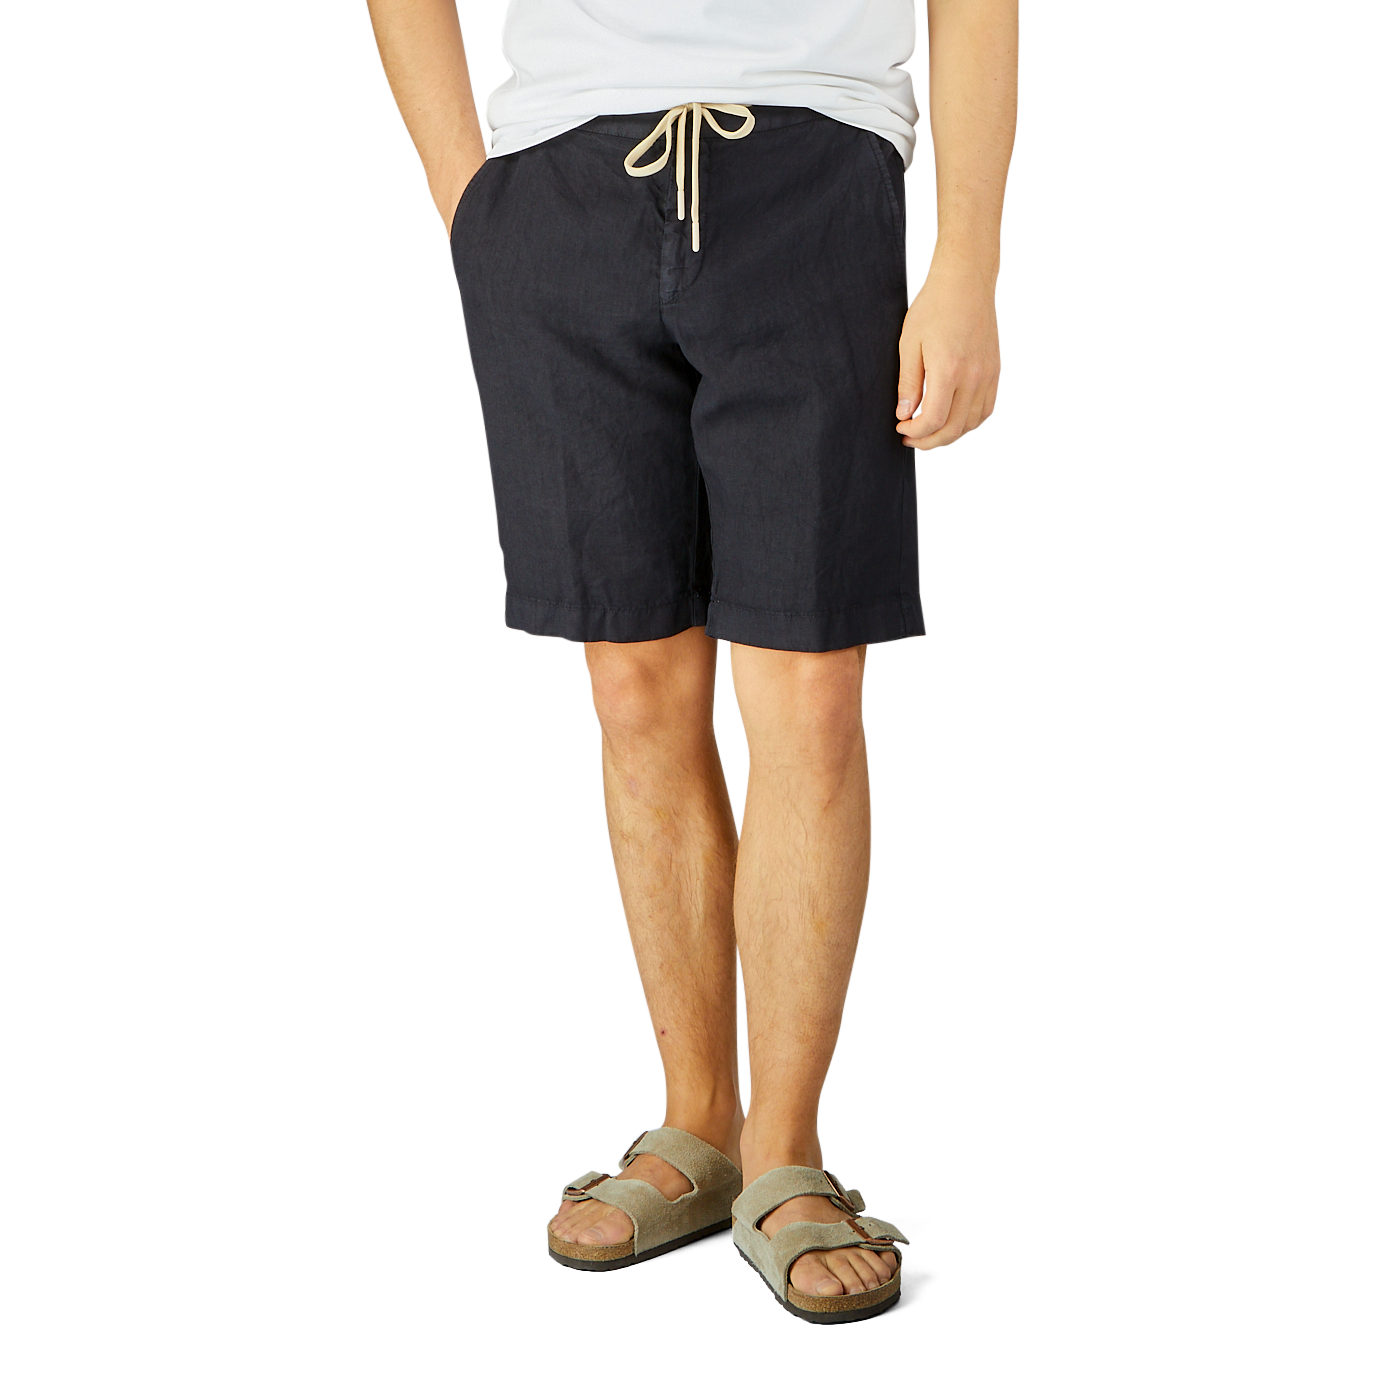 Man wearing Berwich navy blue washed linen drawstring shorts and gray sandals stands against a light background, focusing on his lower torso and legs.